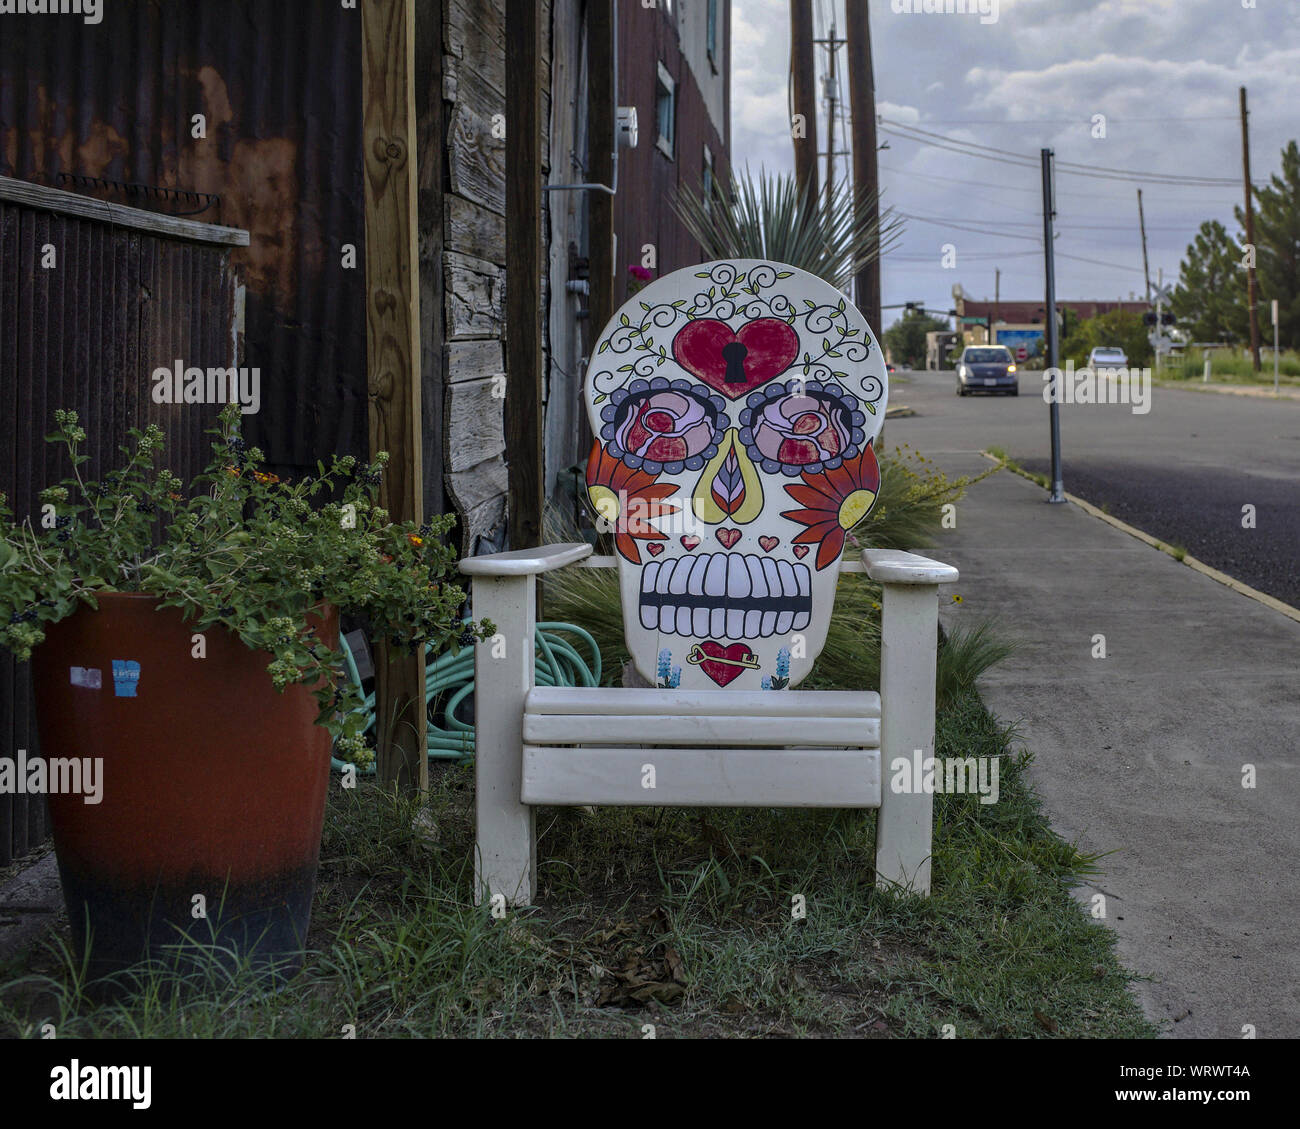 Chair adorned with a calavera, a Mexican traitional representation of a skull, in a street of Alpine, Texas. Stock Photo